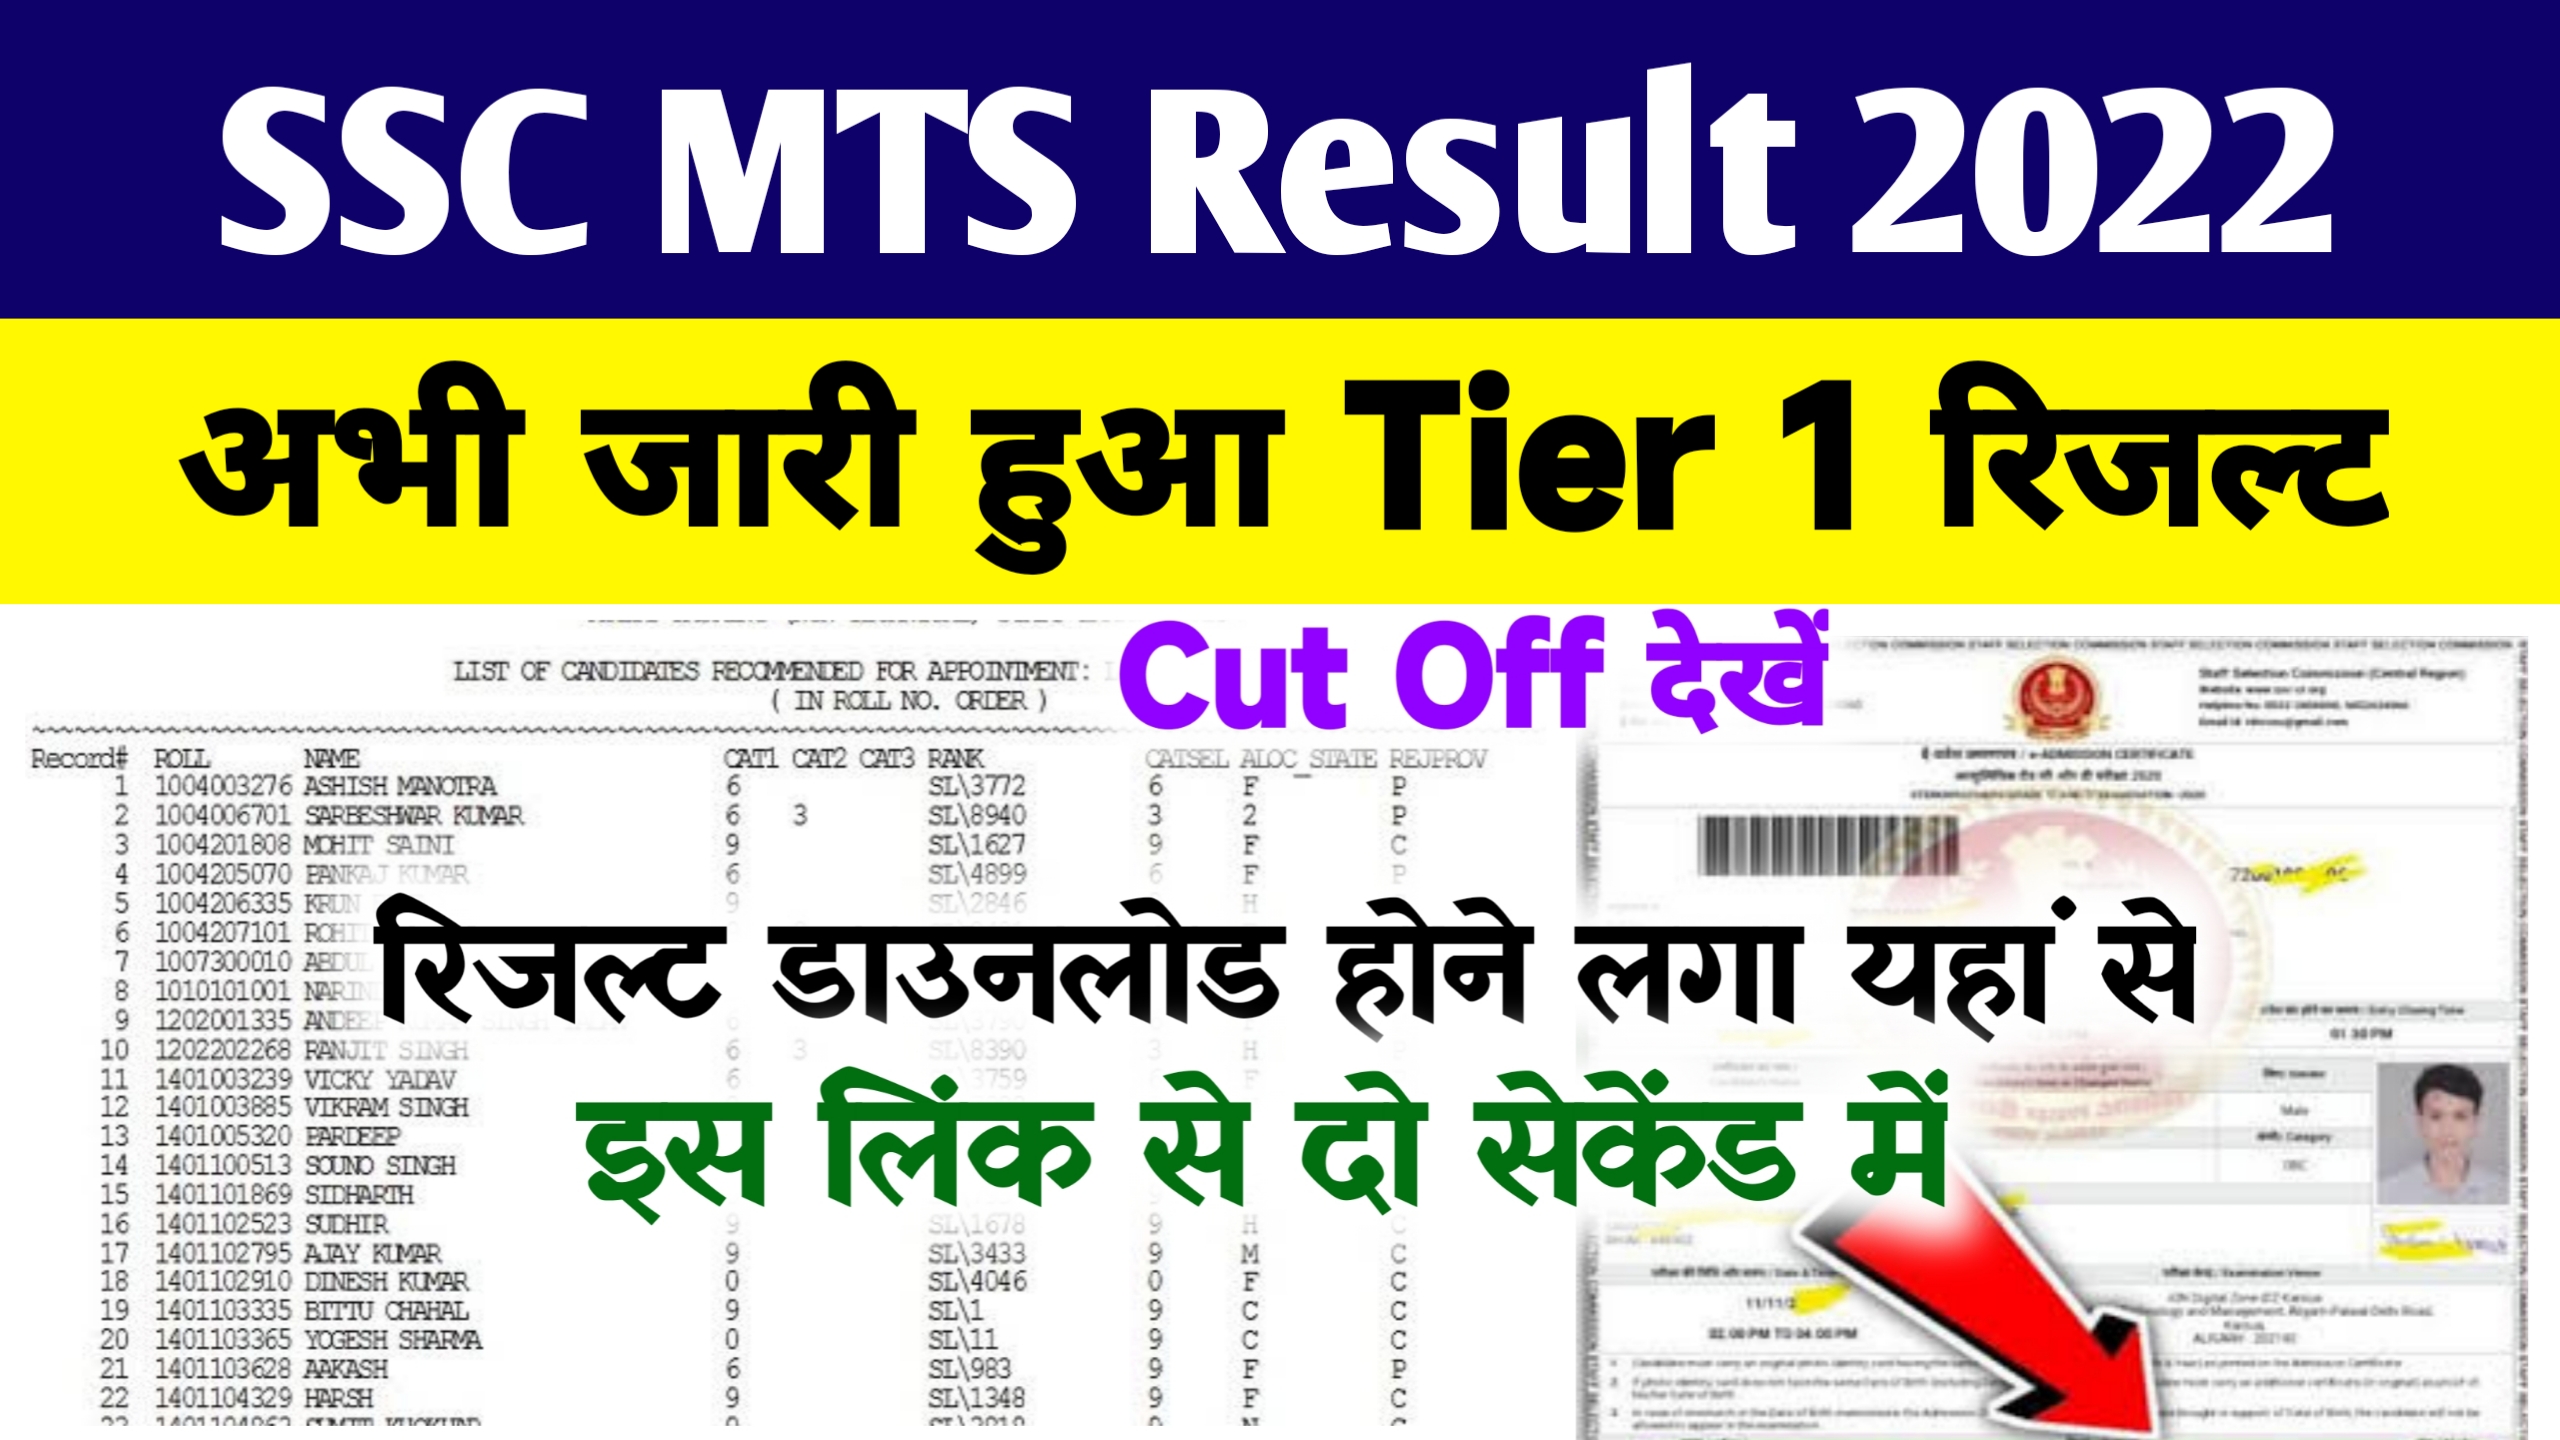 SSC MTS Tier 1 Result 2022 Download @ssc.nic.in ~ Merit List & Cut Off